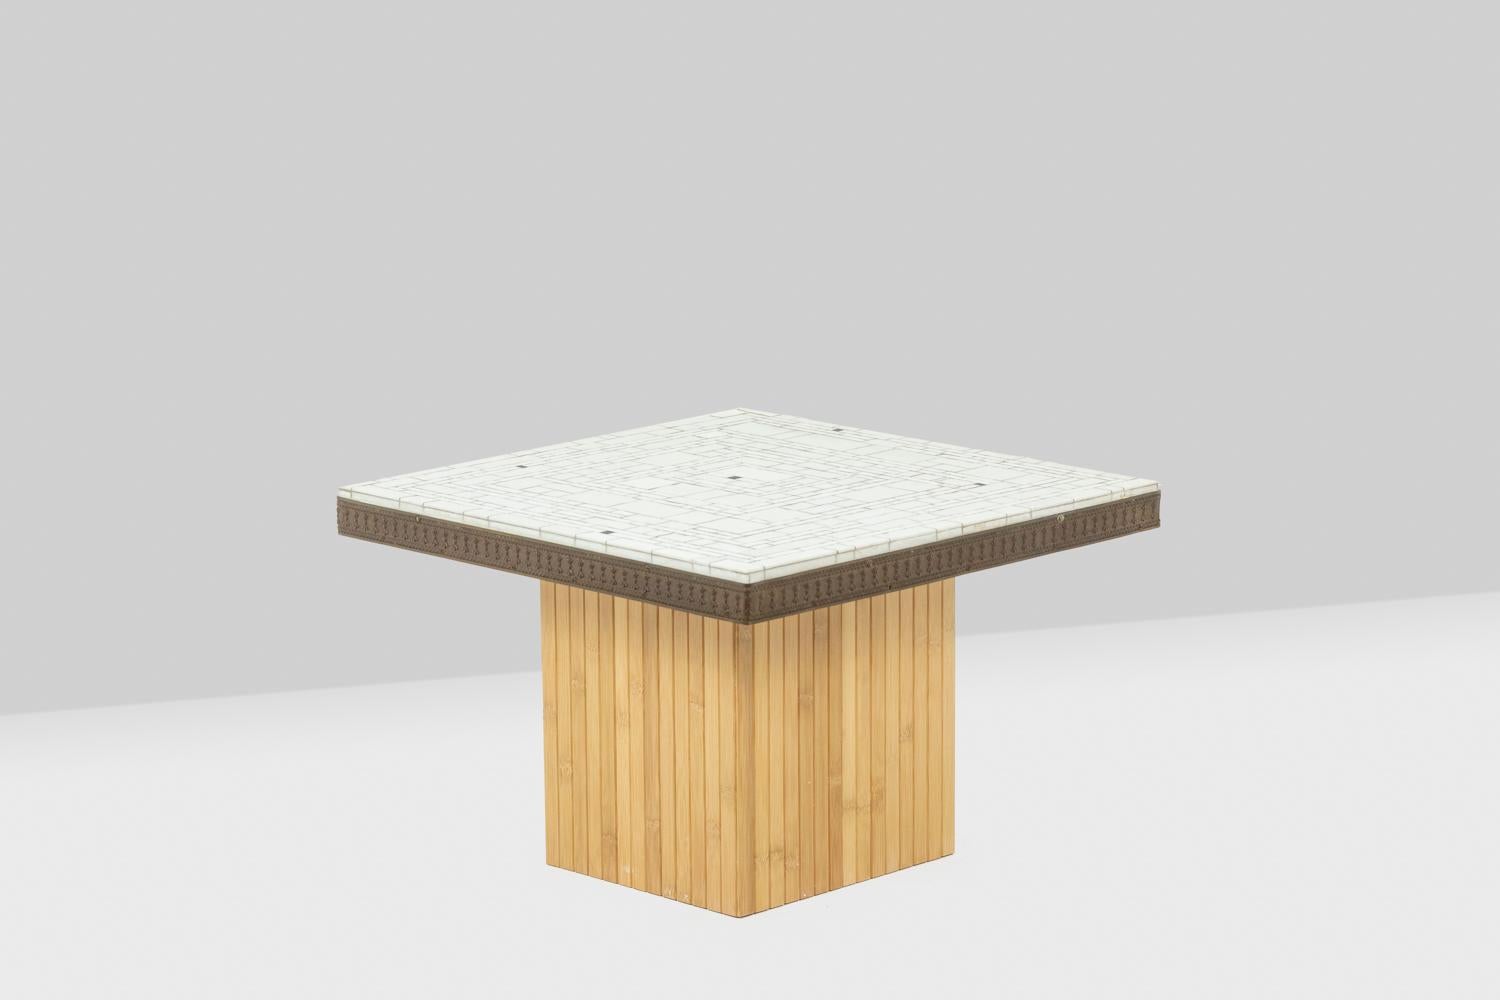 Pair of side tables. Trays in mosaics, square in shape resting on a ribbed base, in wood and in square shape.

German work realized in the 1970s.